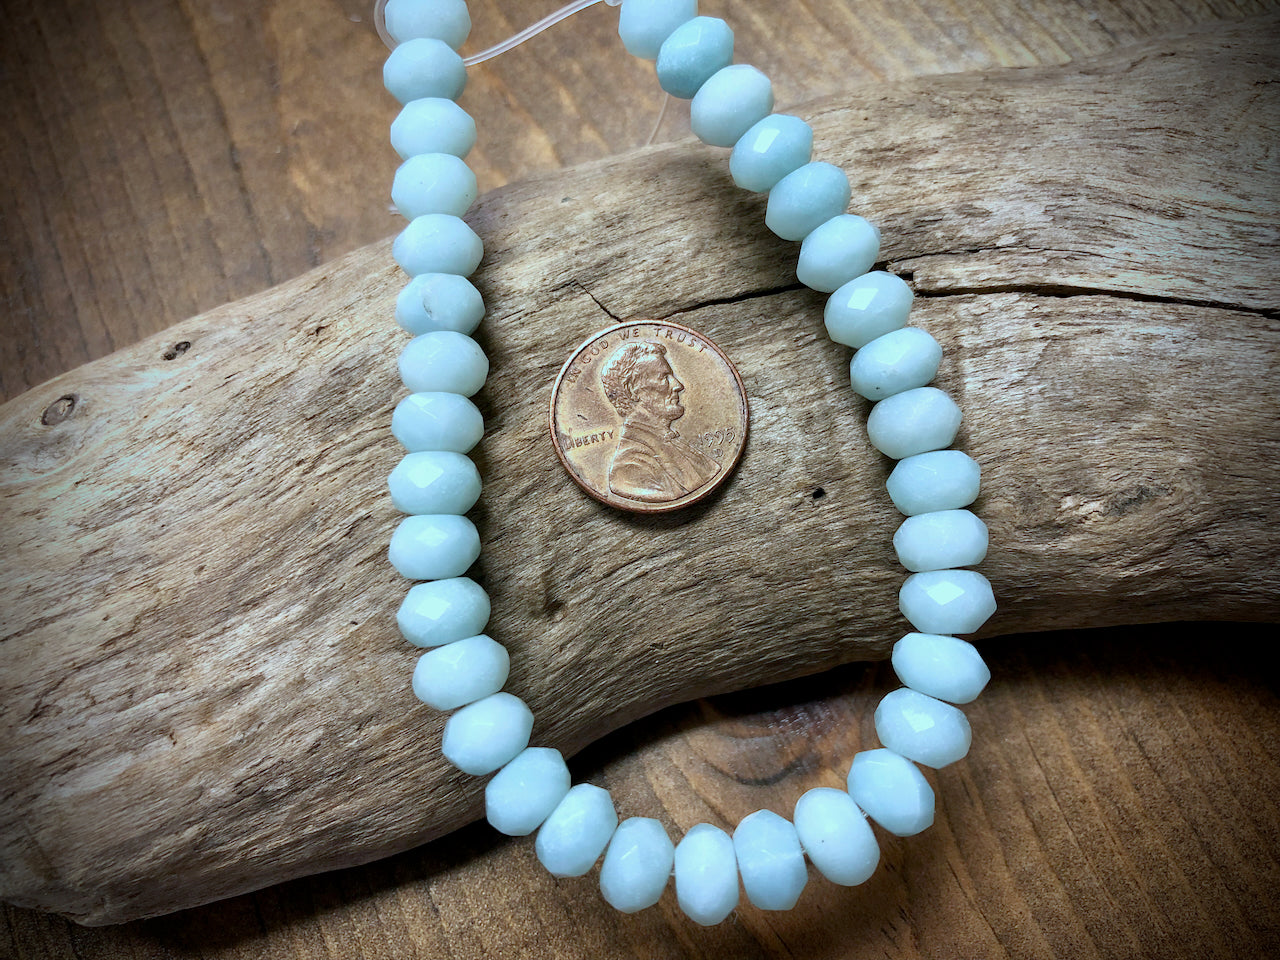 Amazonite Faceted Rondelles Bead Strand - 8mm - 8"